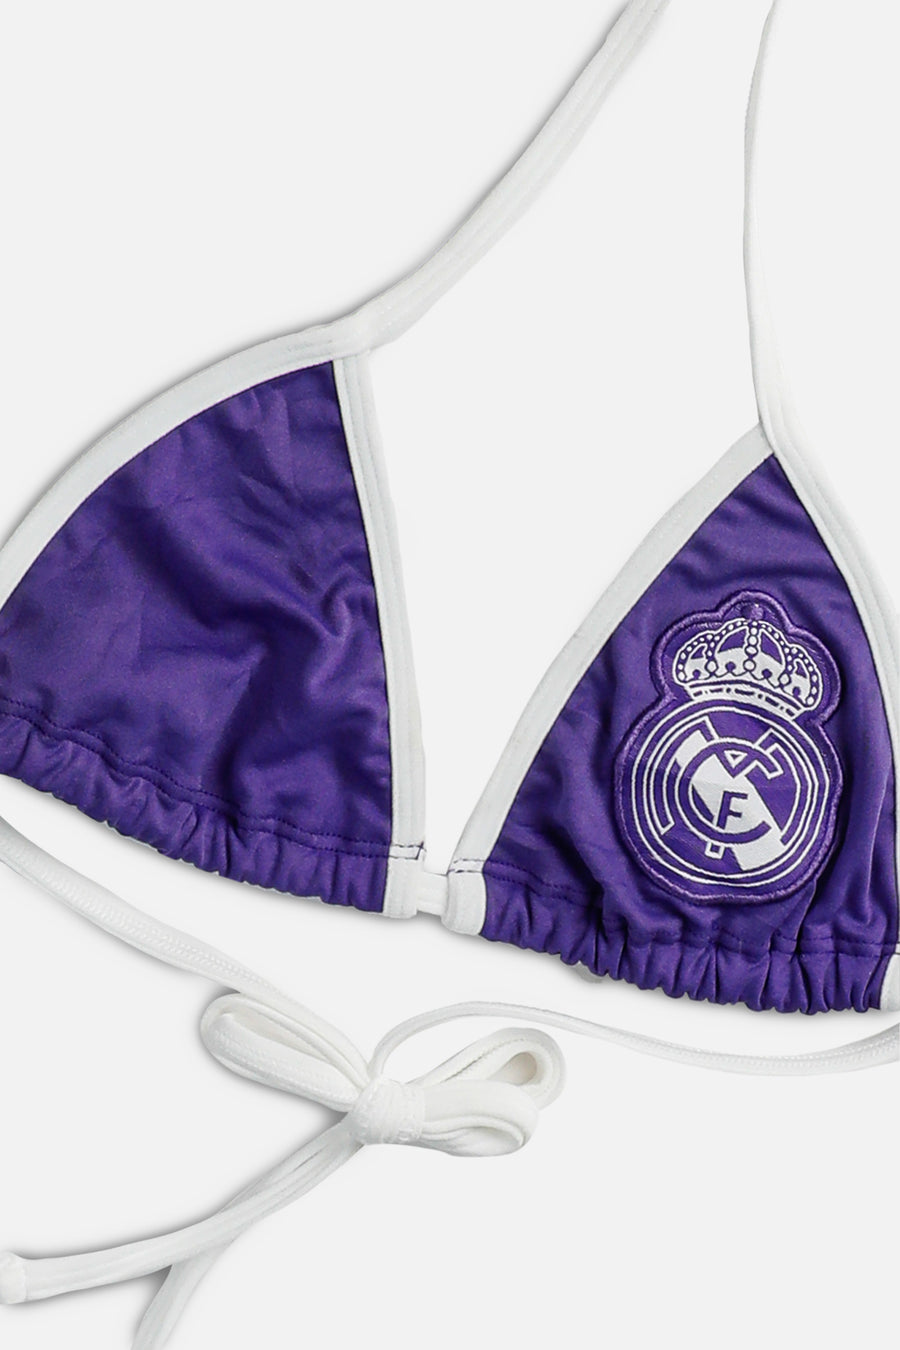 Rework Madrid Soccer Triangle Top - S